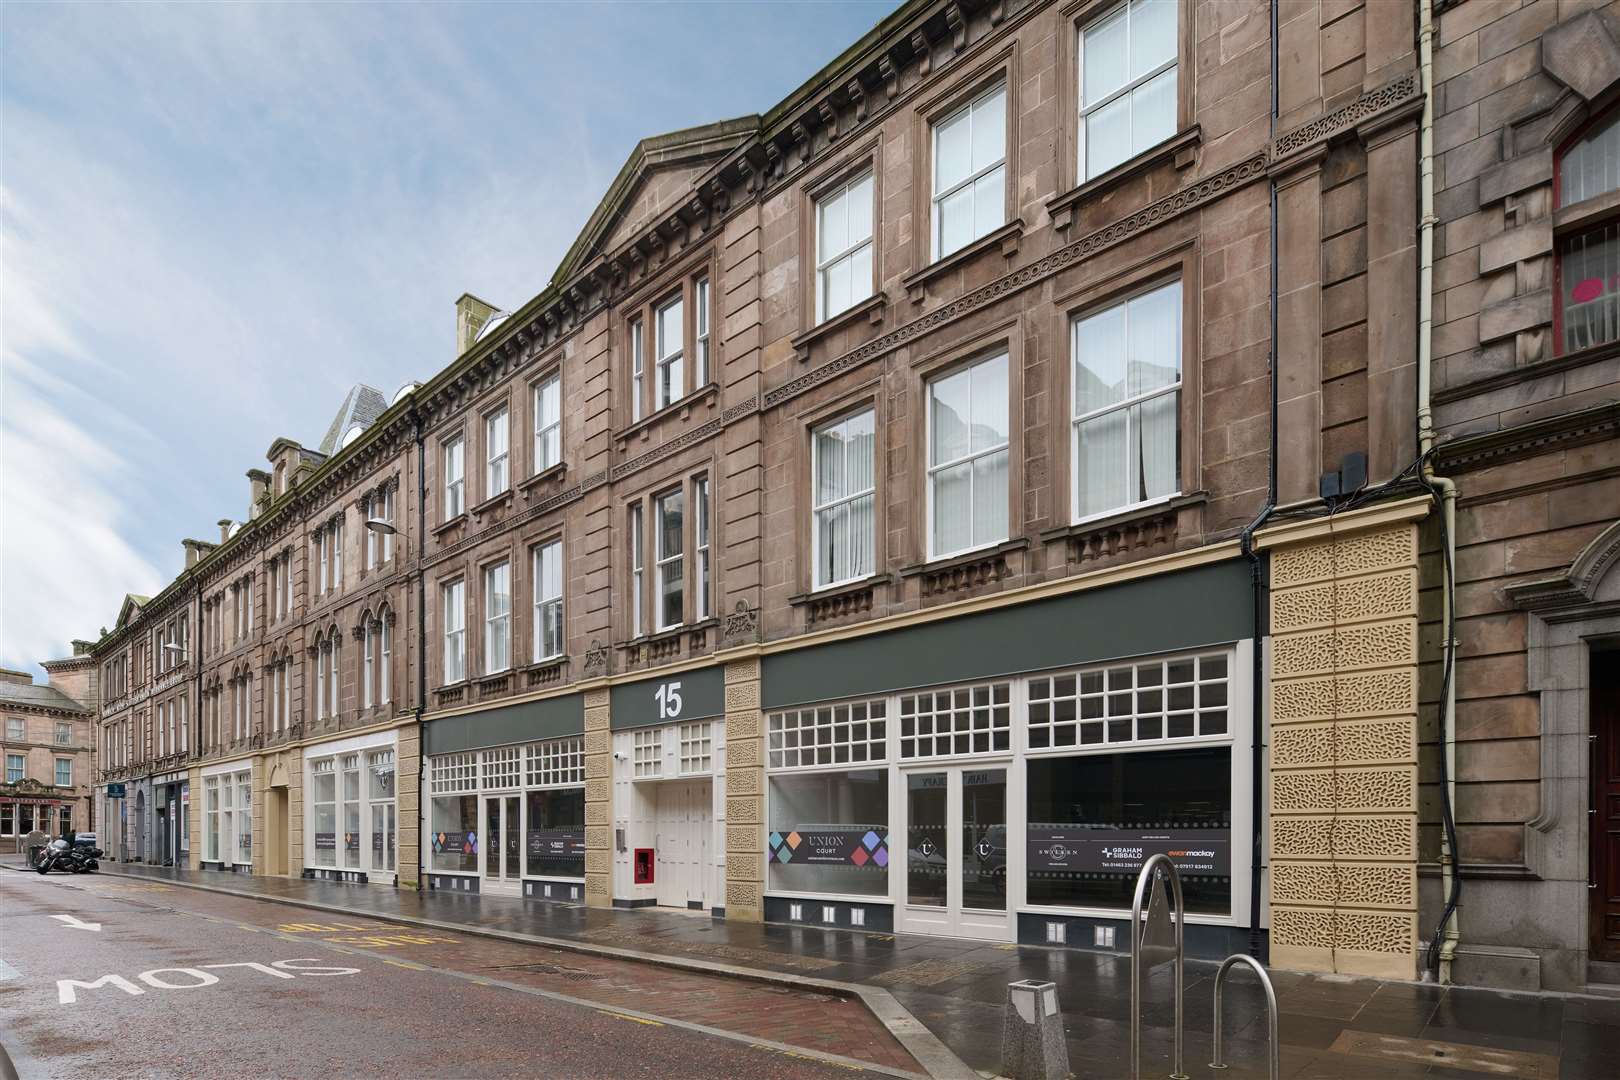 Prickly Thistle is set to take up the first unit at the retail development.